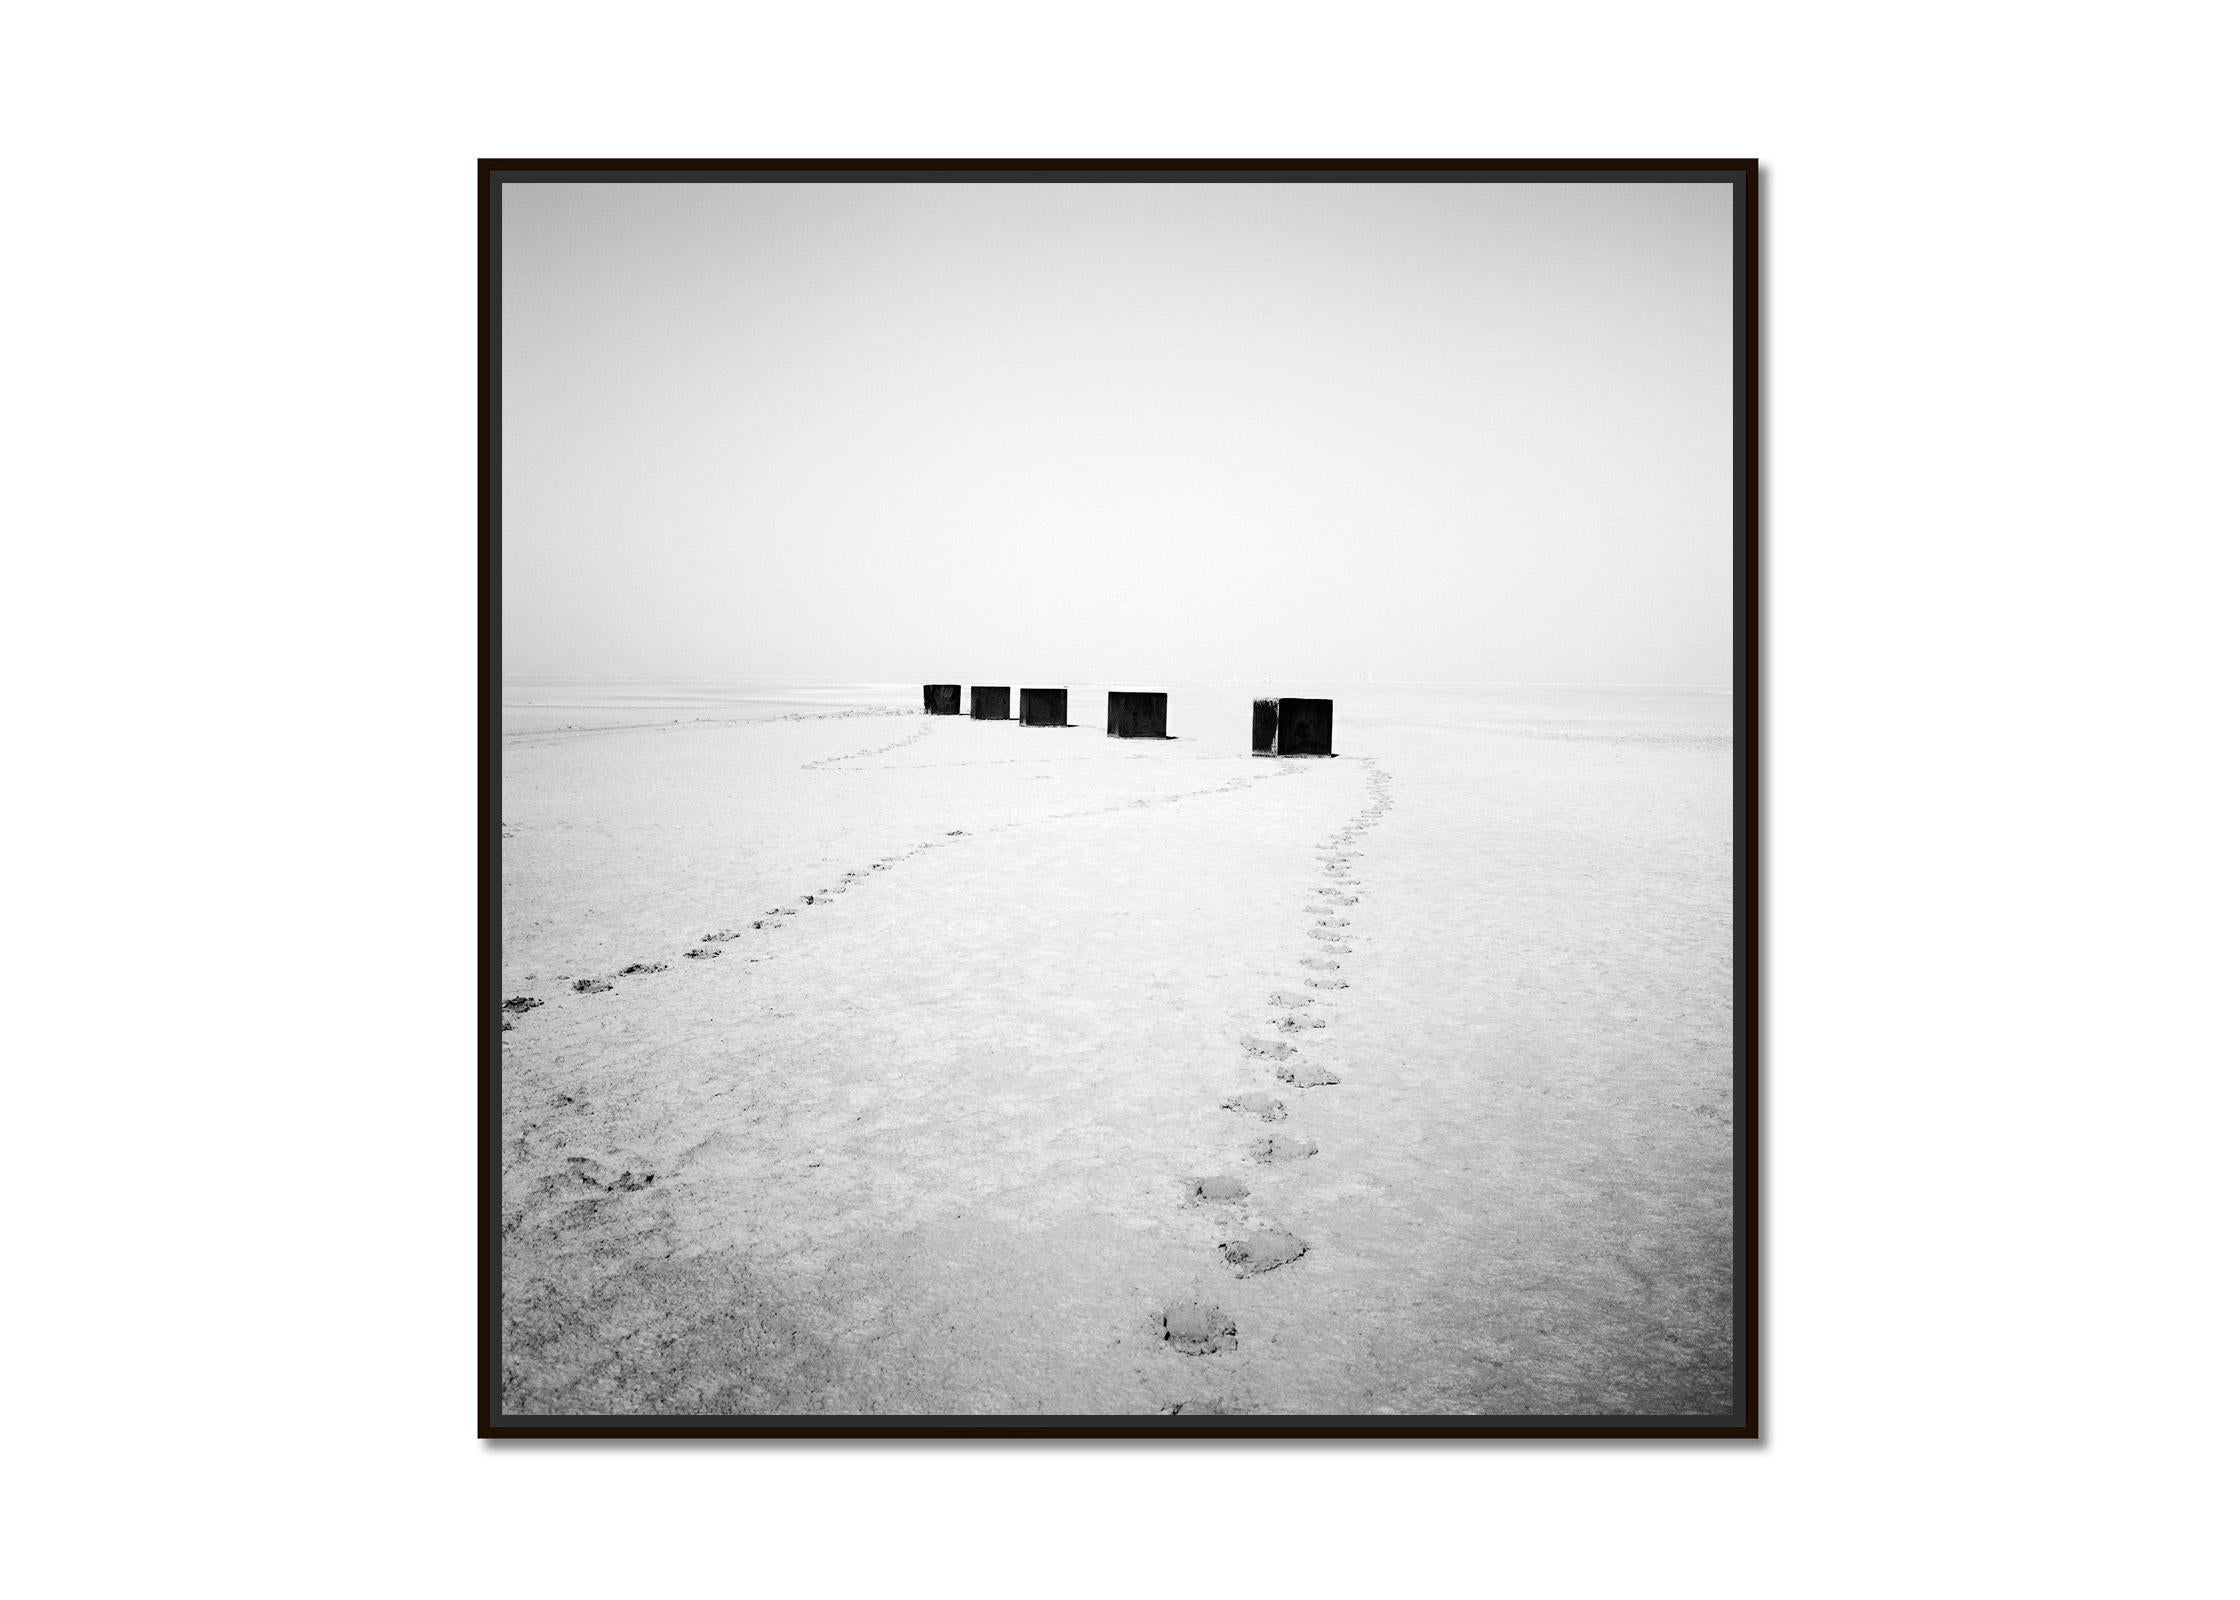 Five Squares, desert, Arizona, USA, black and white photography, art landscape - Photograph by Gerald Berghammer